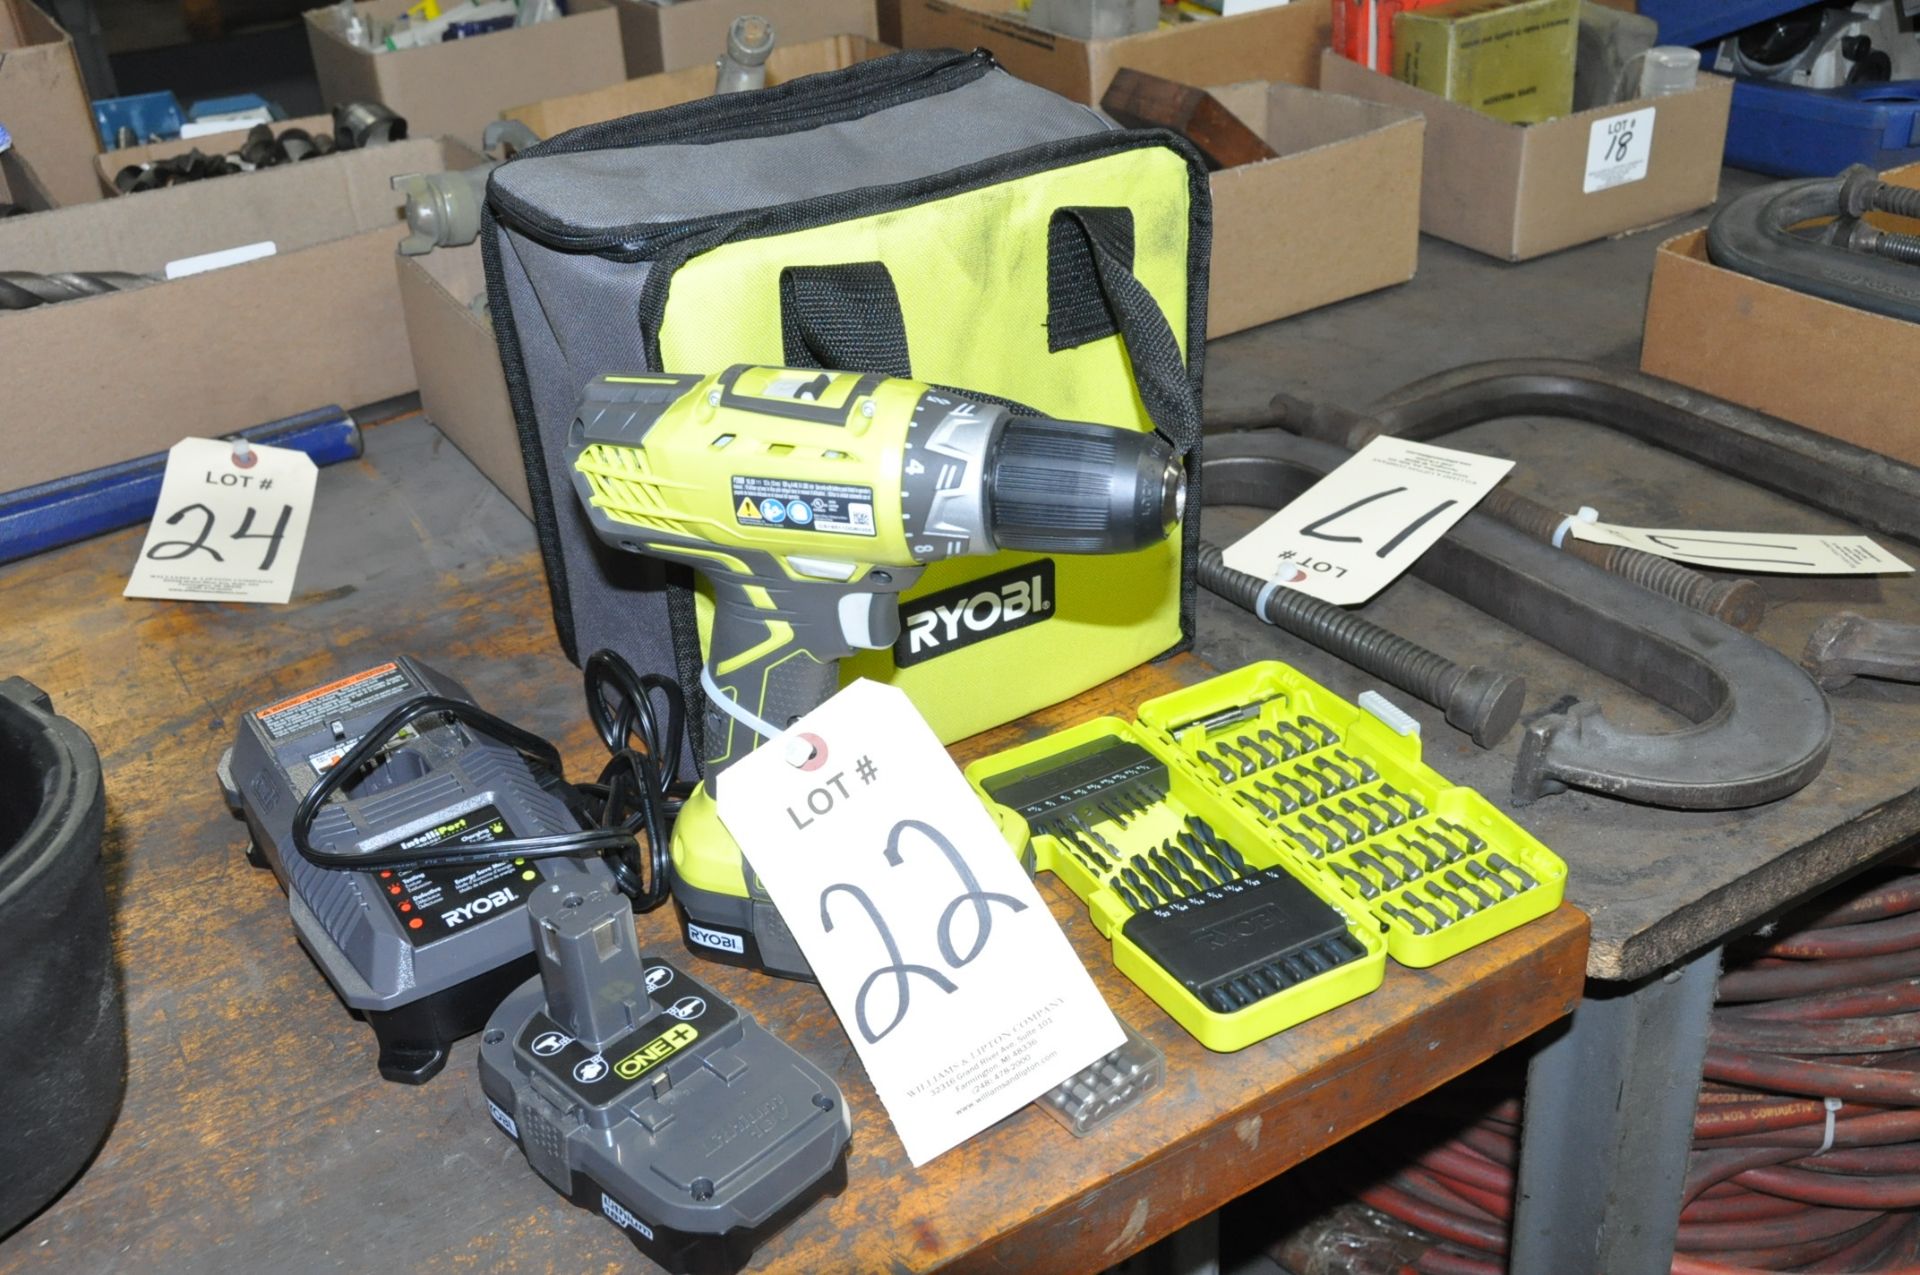 Lot-RYOBI 18V Cordless Drill Set with Charger, (2) Batteries and Bit Set with Case